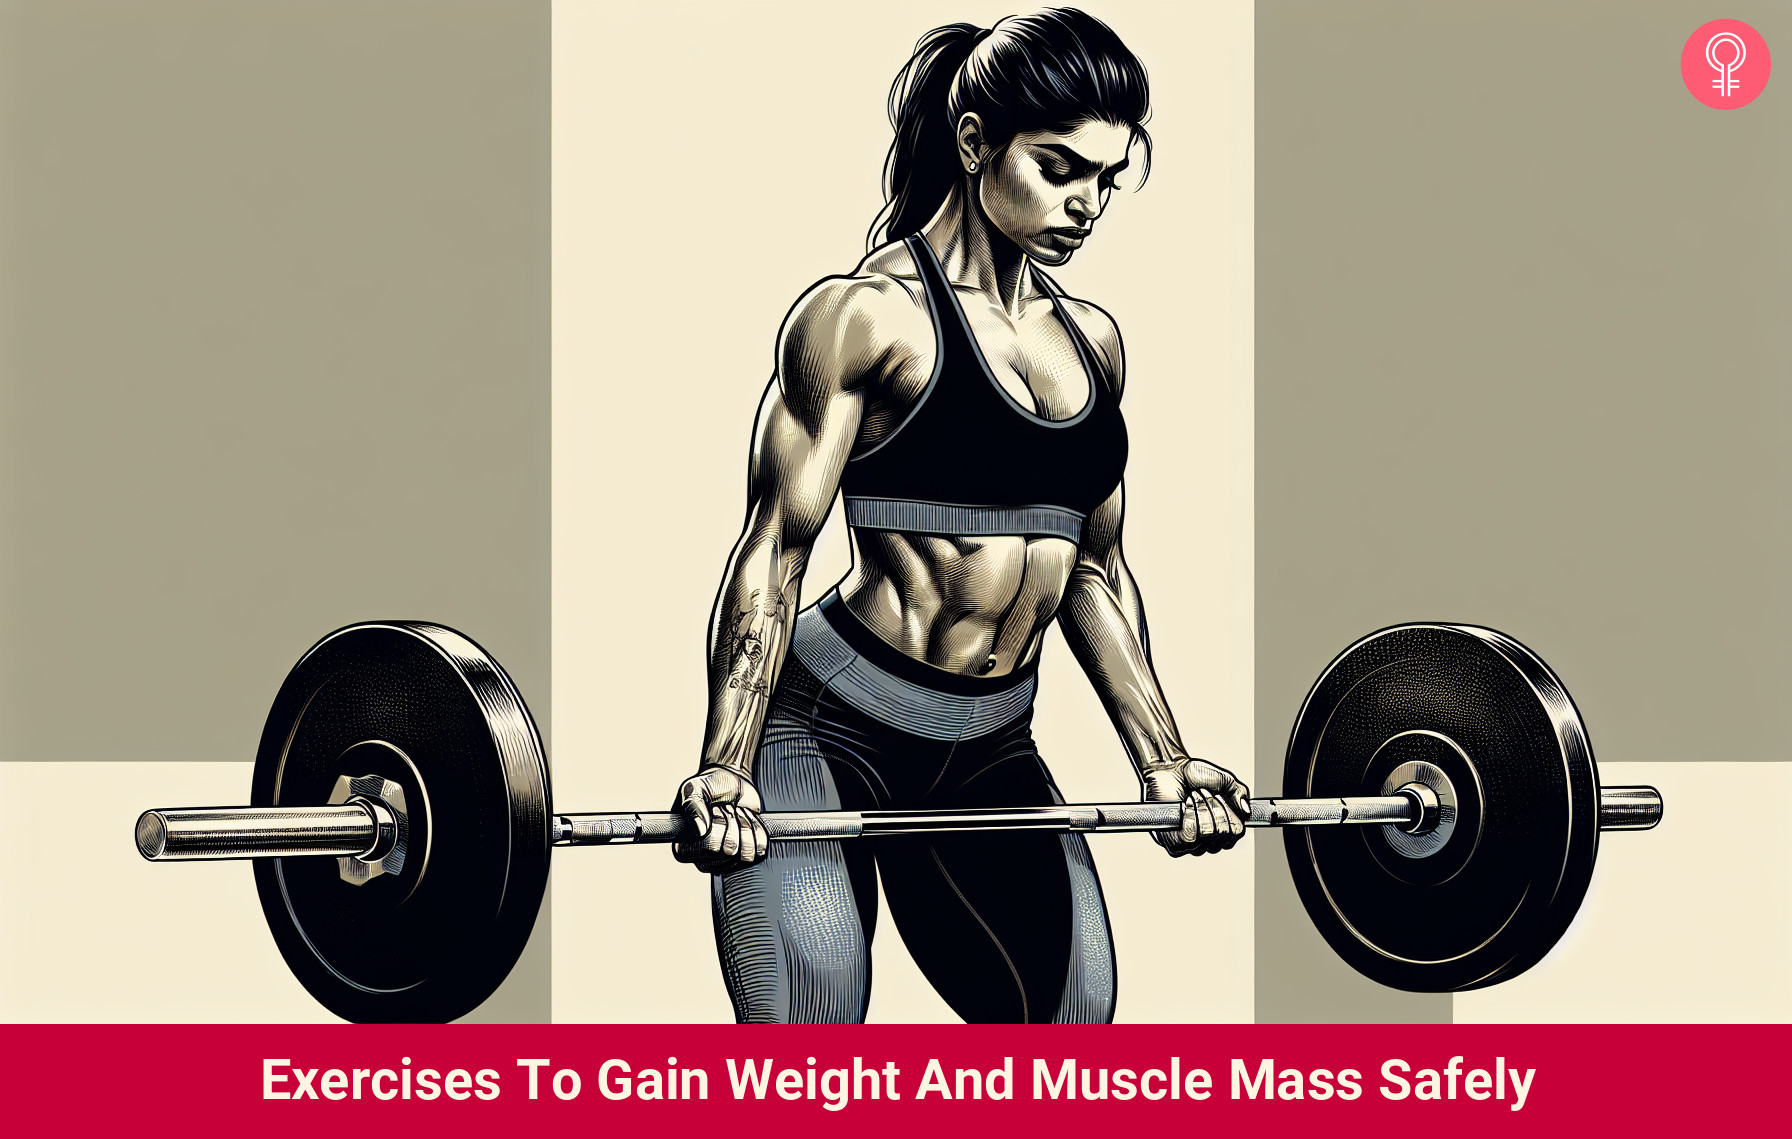 8 Exercises To Gain Weight And Muscle Mass Safely